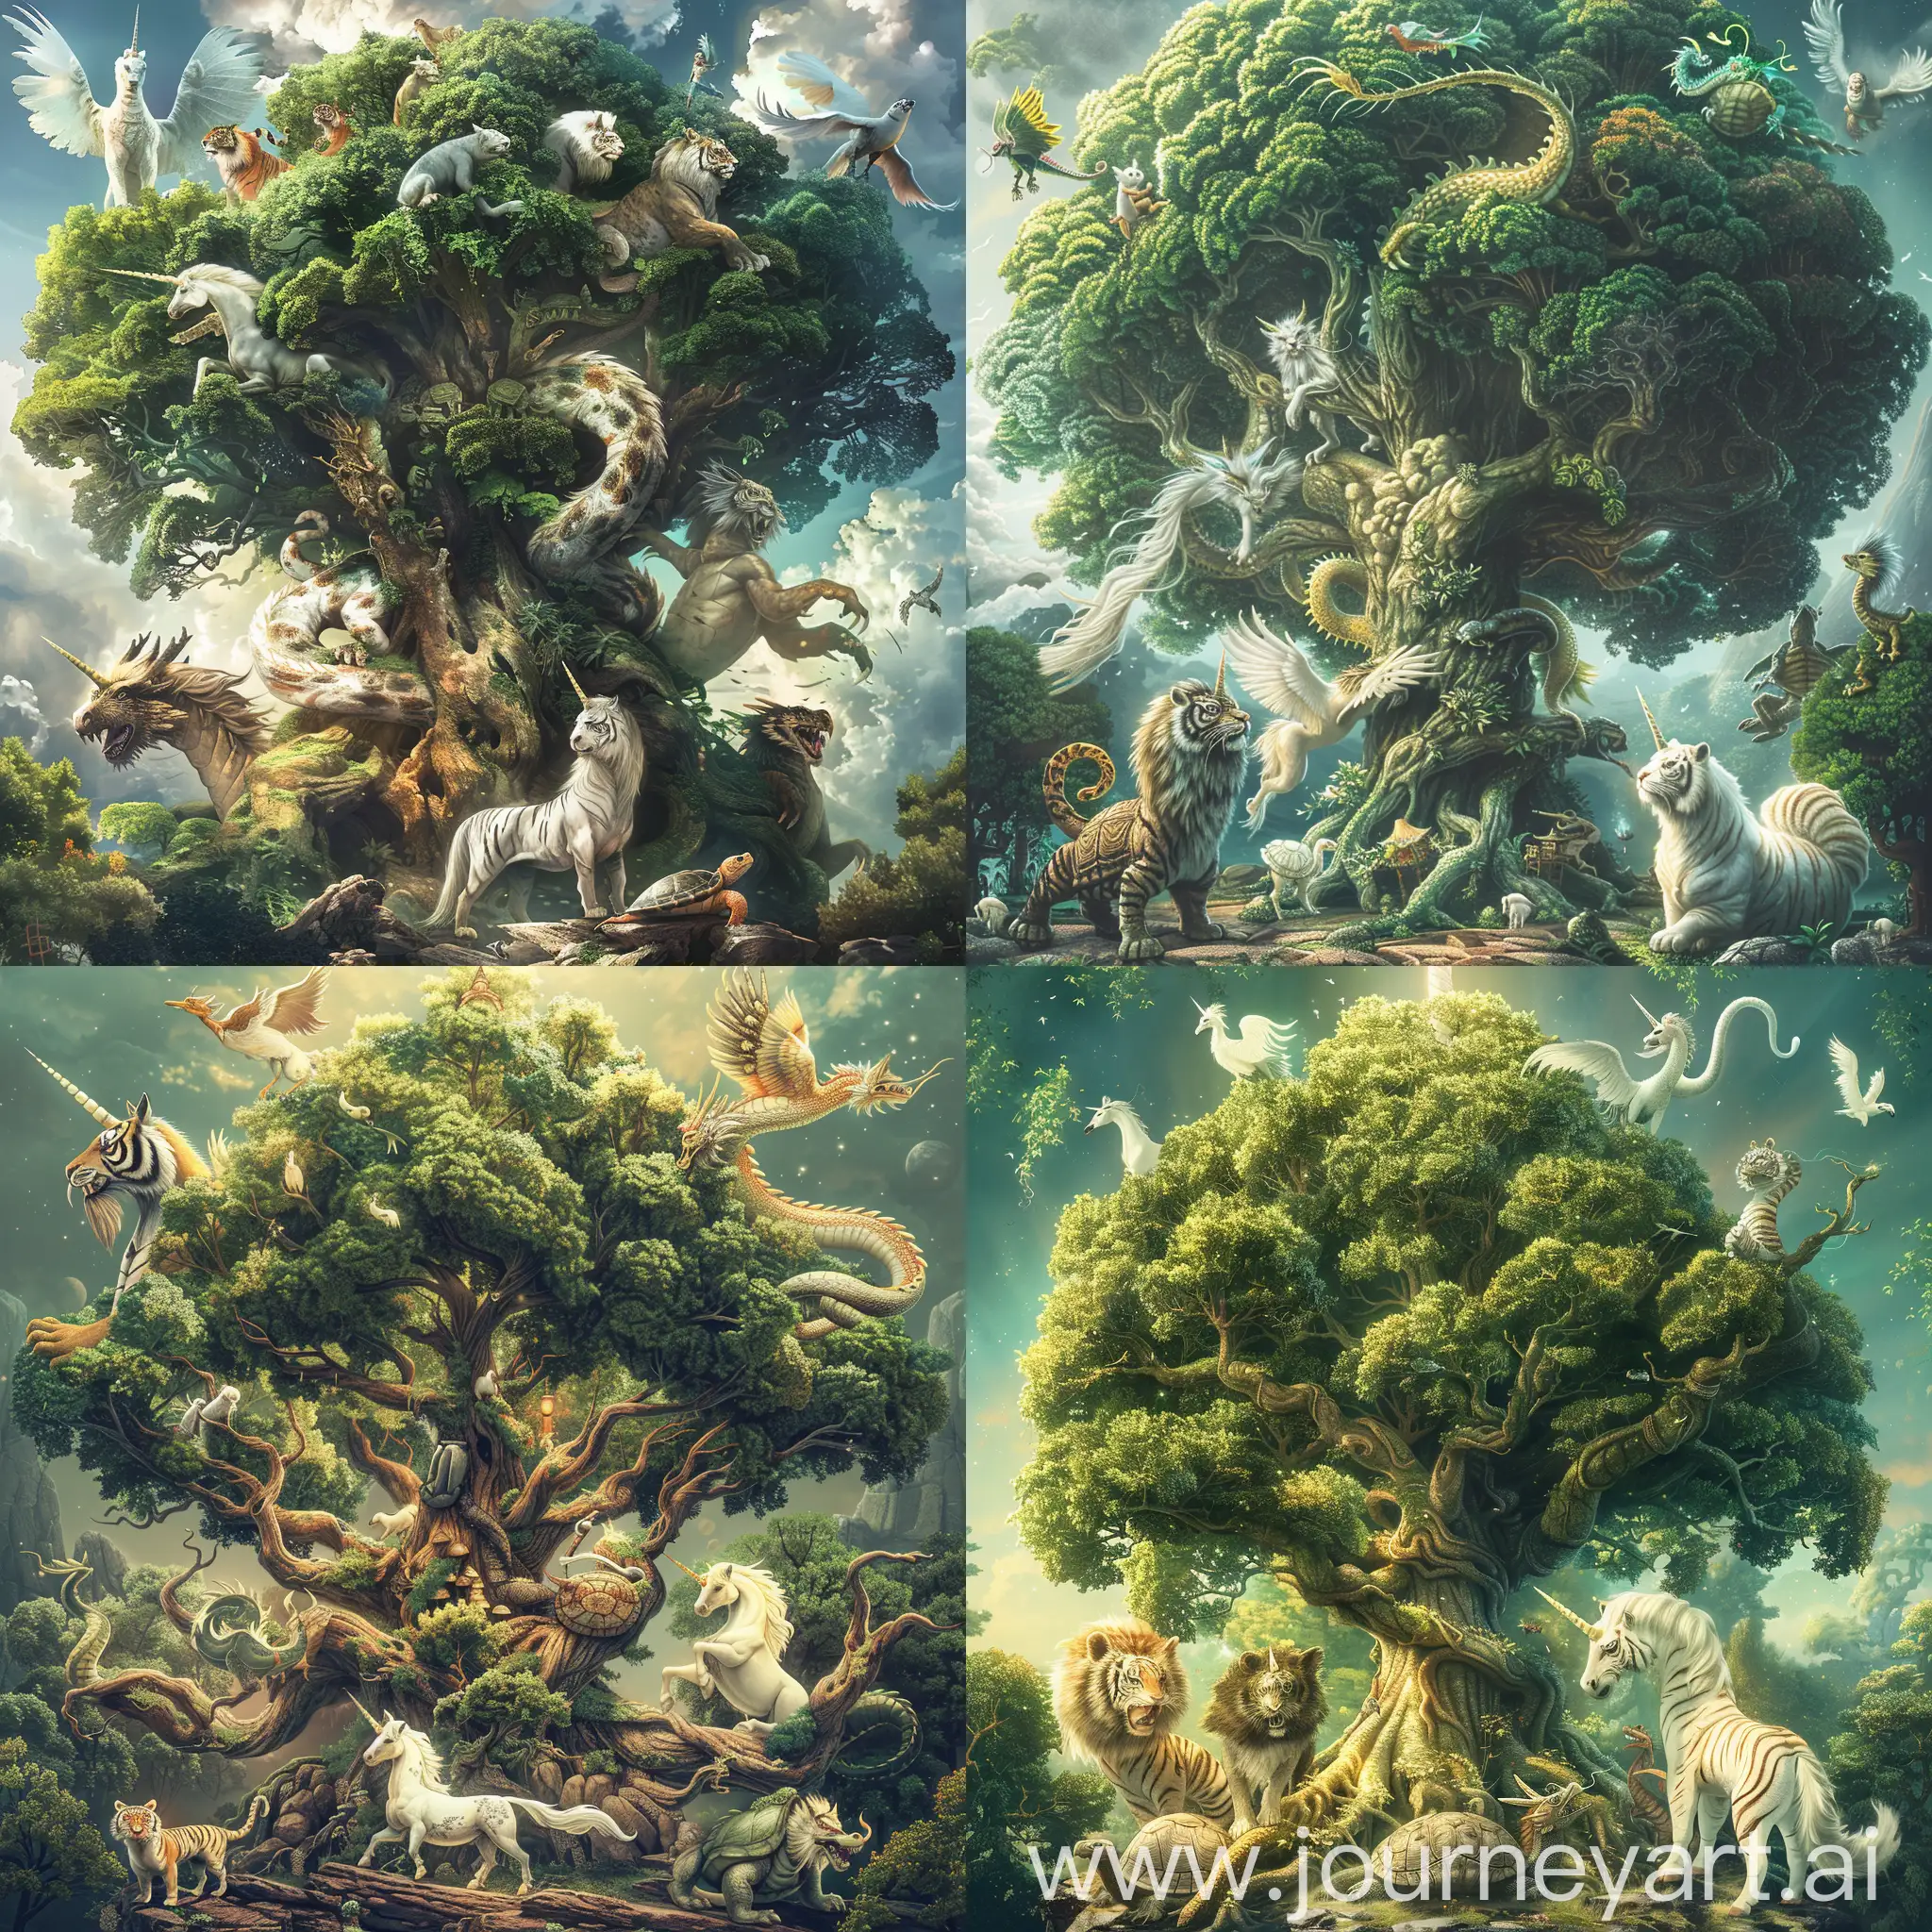 Majestic-Tree-of-Mythical-Creatures-Kunpeng-Unicorn-Phoenix-Turtle-Dragon-and-White-Tiger